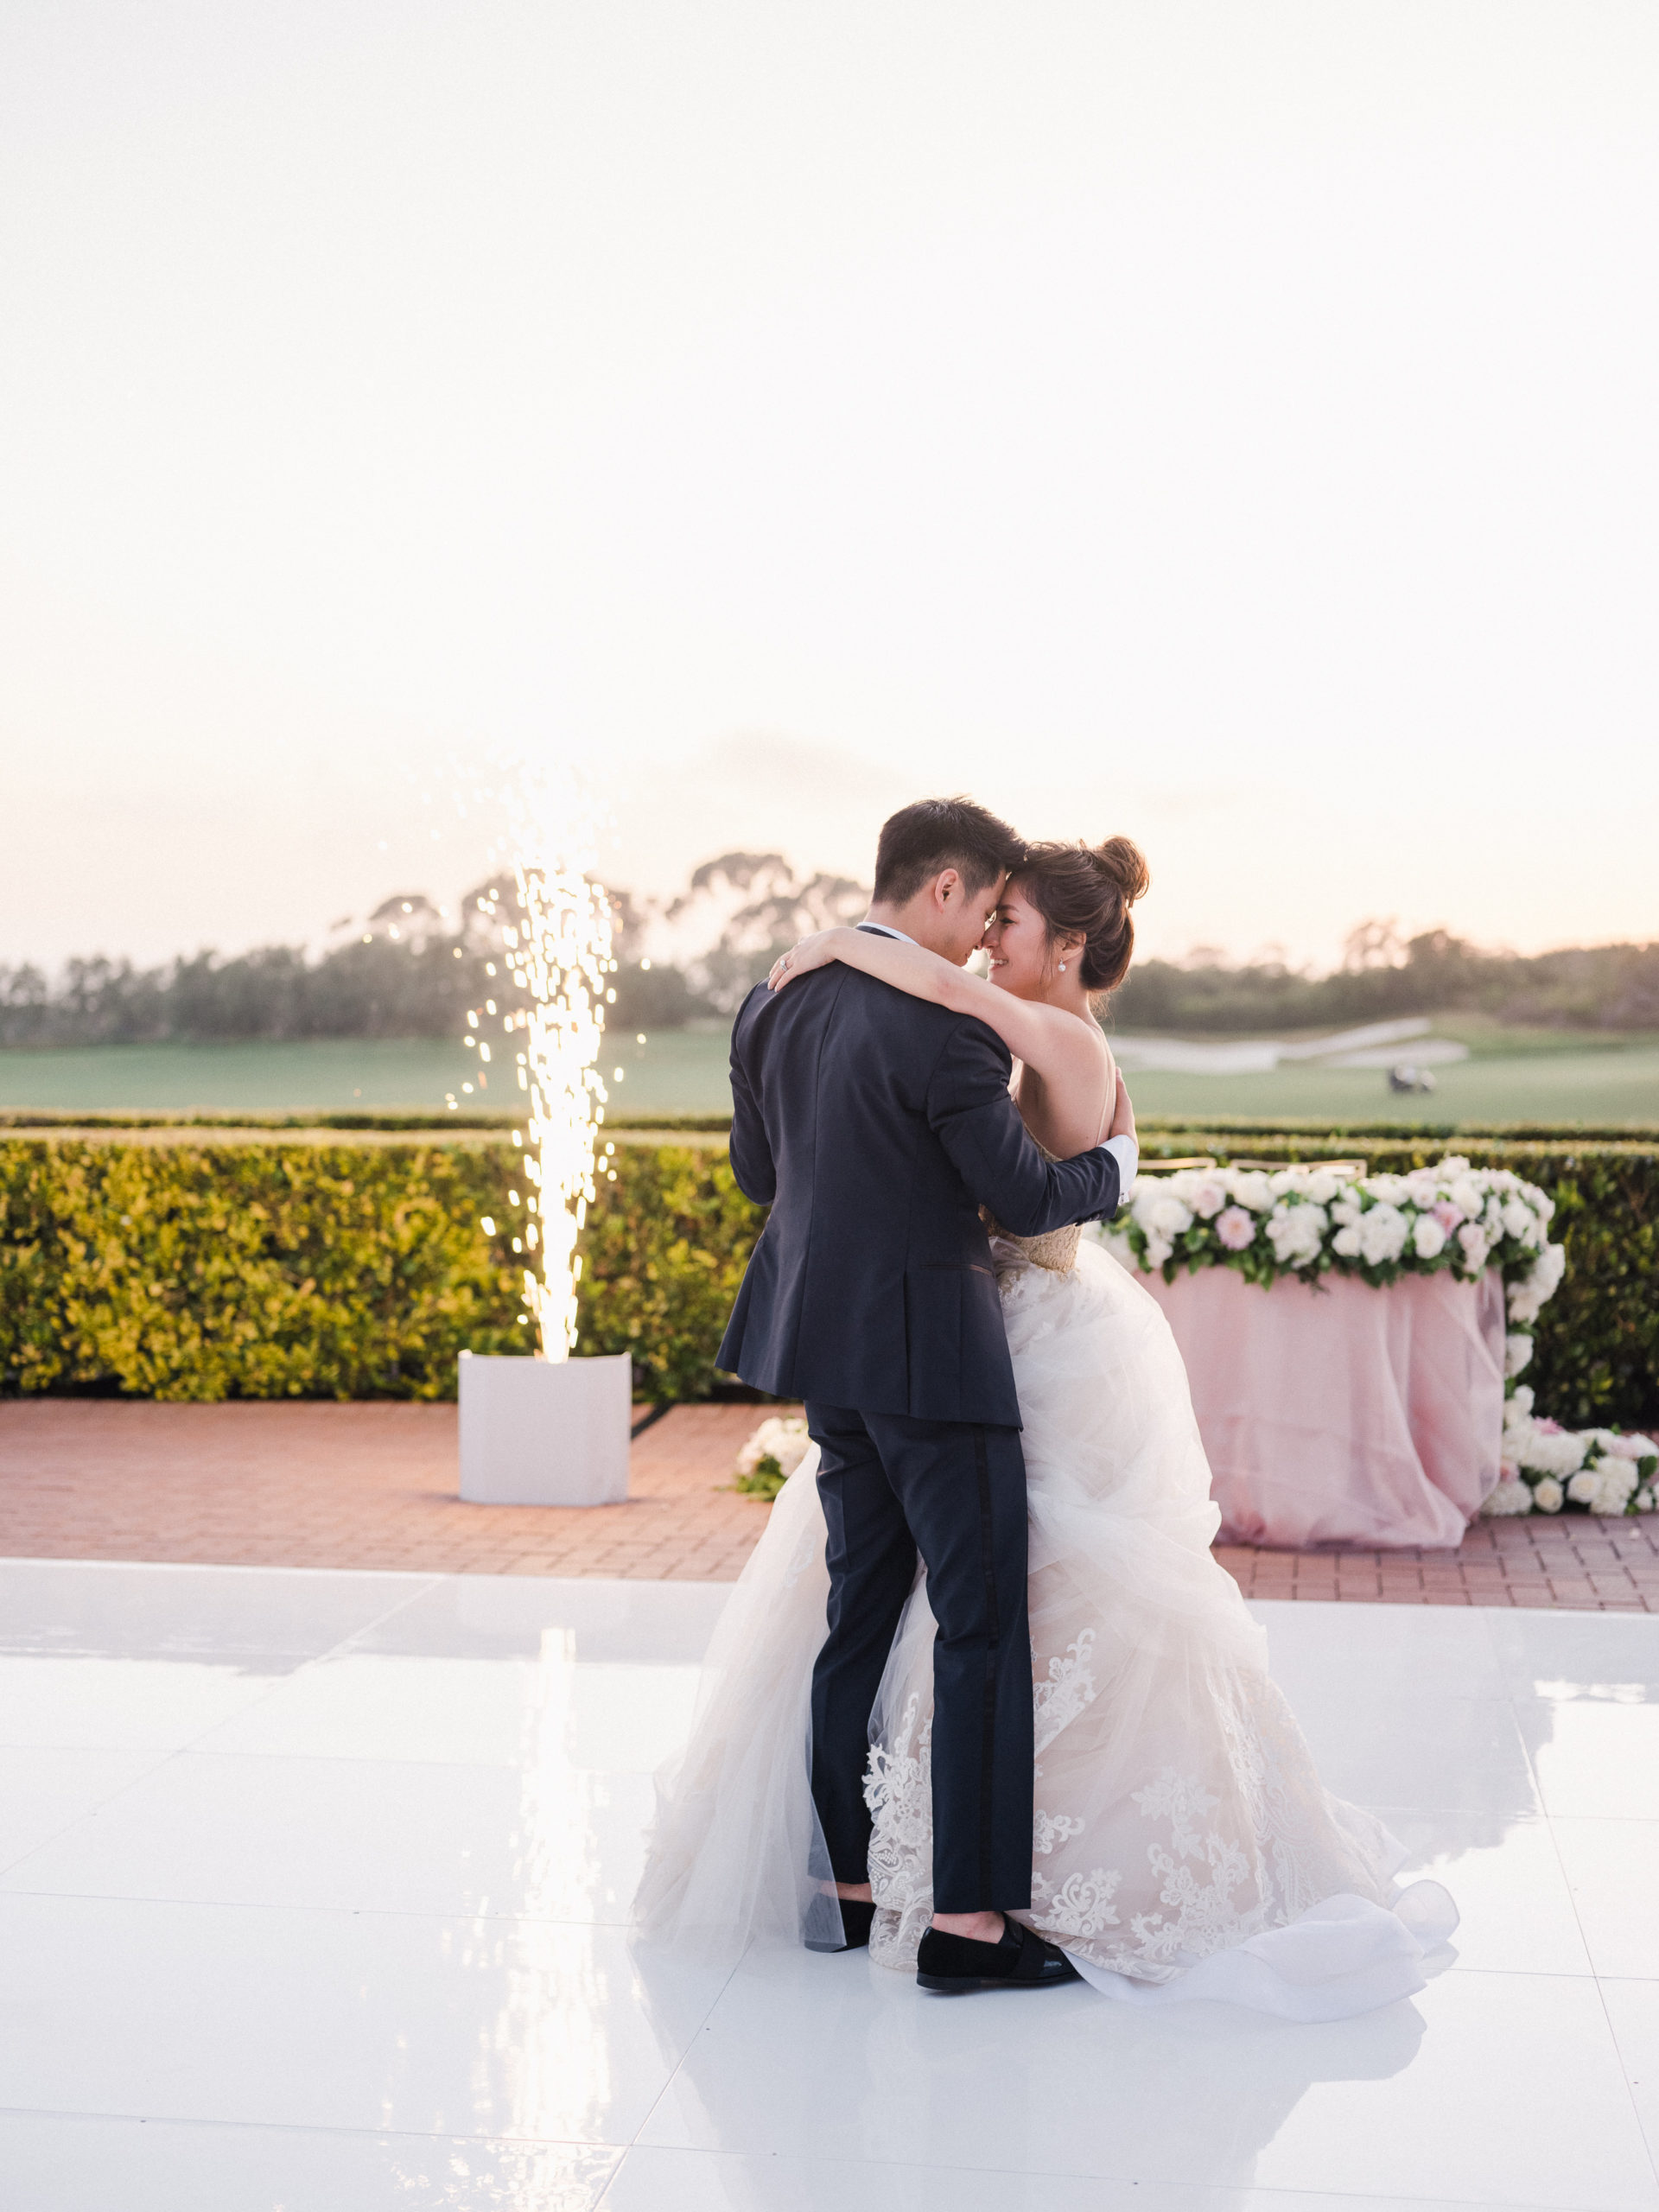 Kevin and Rose's Pelican Hill Wedding was pure magic. The gorgeous panoramic views of the Pacific Ocean coupled with the traditional garden settings offered so many enchanting backdrops to photograph this charming couple. #wedding #photography

Caroline Tran - Pelican Hill Wedding Photography - Pelican Hill Wedding Photos - Pelican Hill Wedding Photographer - Wedding Photography - Wedding Photos - Wedding First Dance - Wedding Ceremony - Wedding Receptions - Pelican Hill